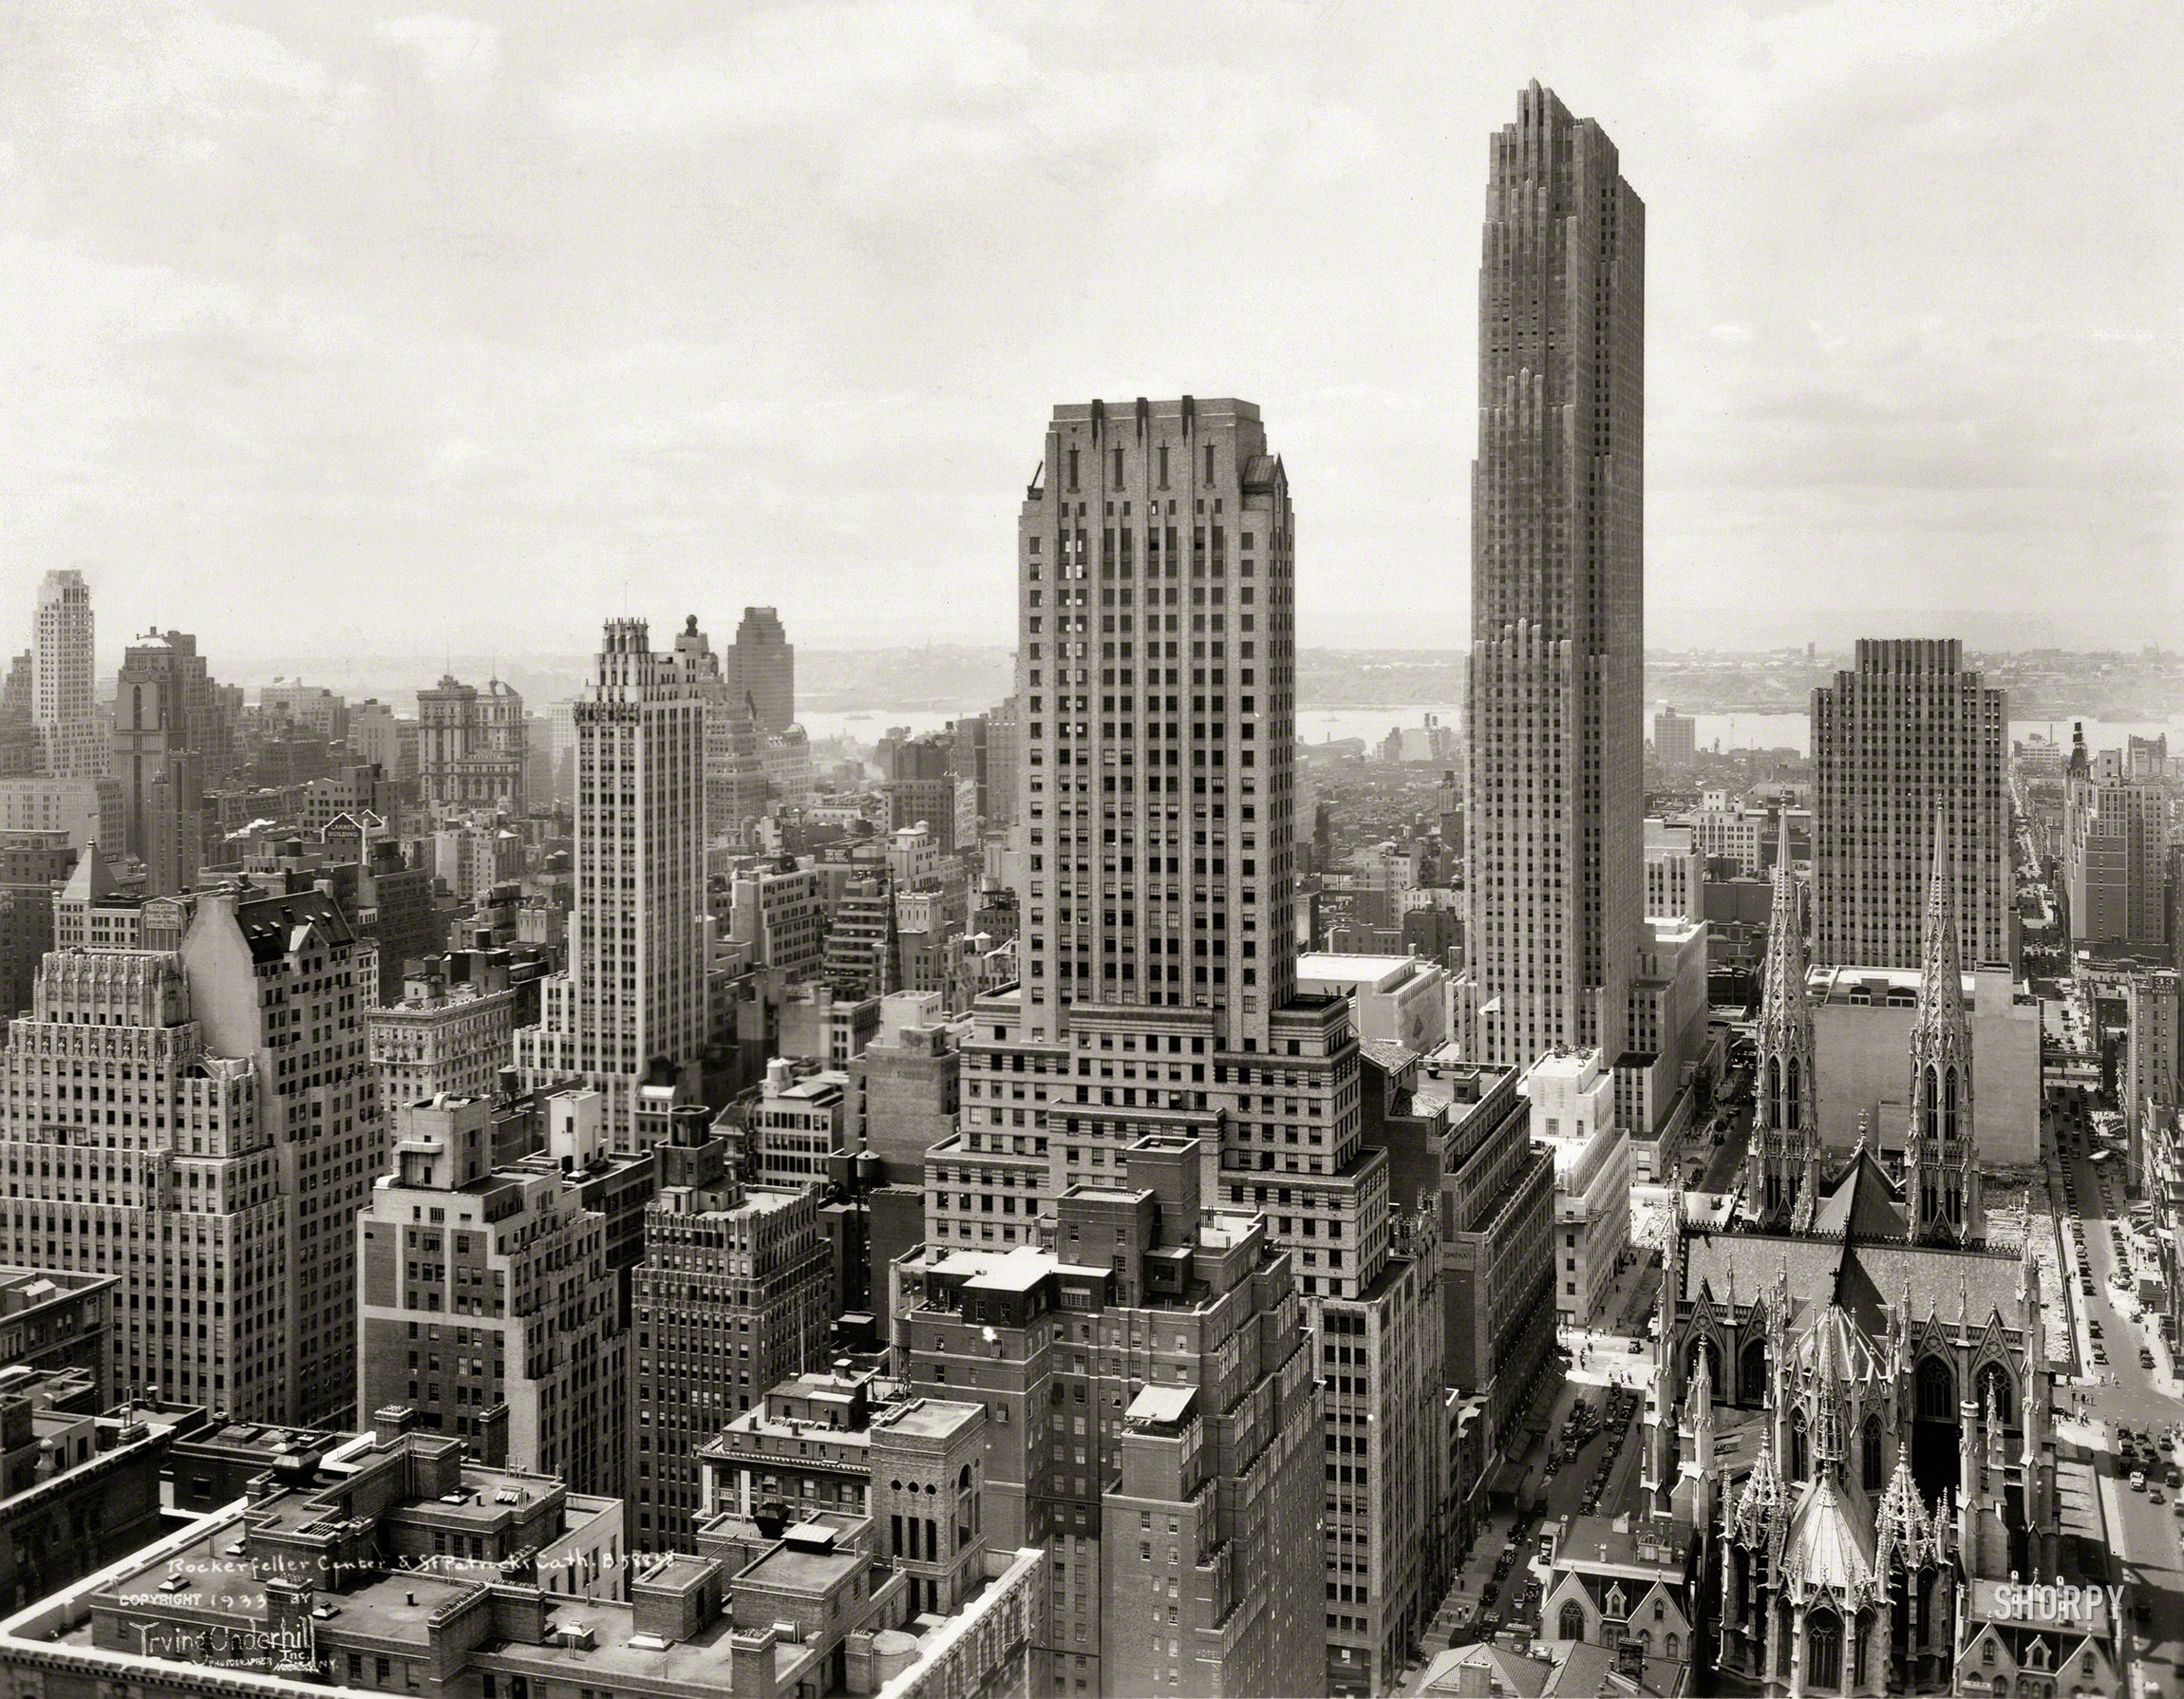 New York, 1933. "Midtown Manhattan skyline -- Rockefeller Center and St. Patrick's Cathedral." Gelatin silver print by Irving Underhill. View full size.